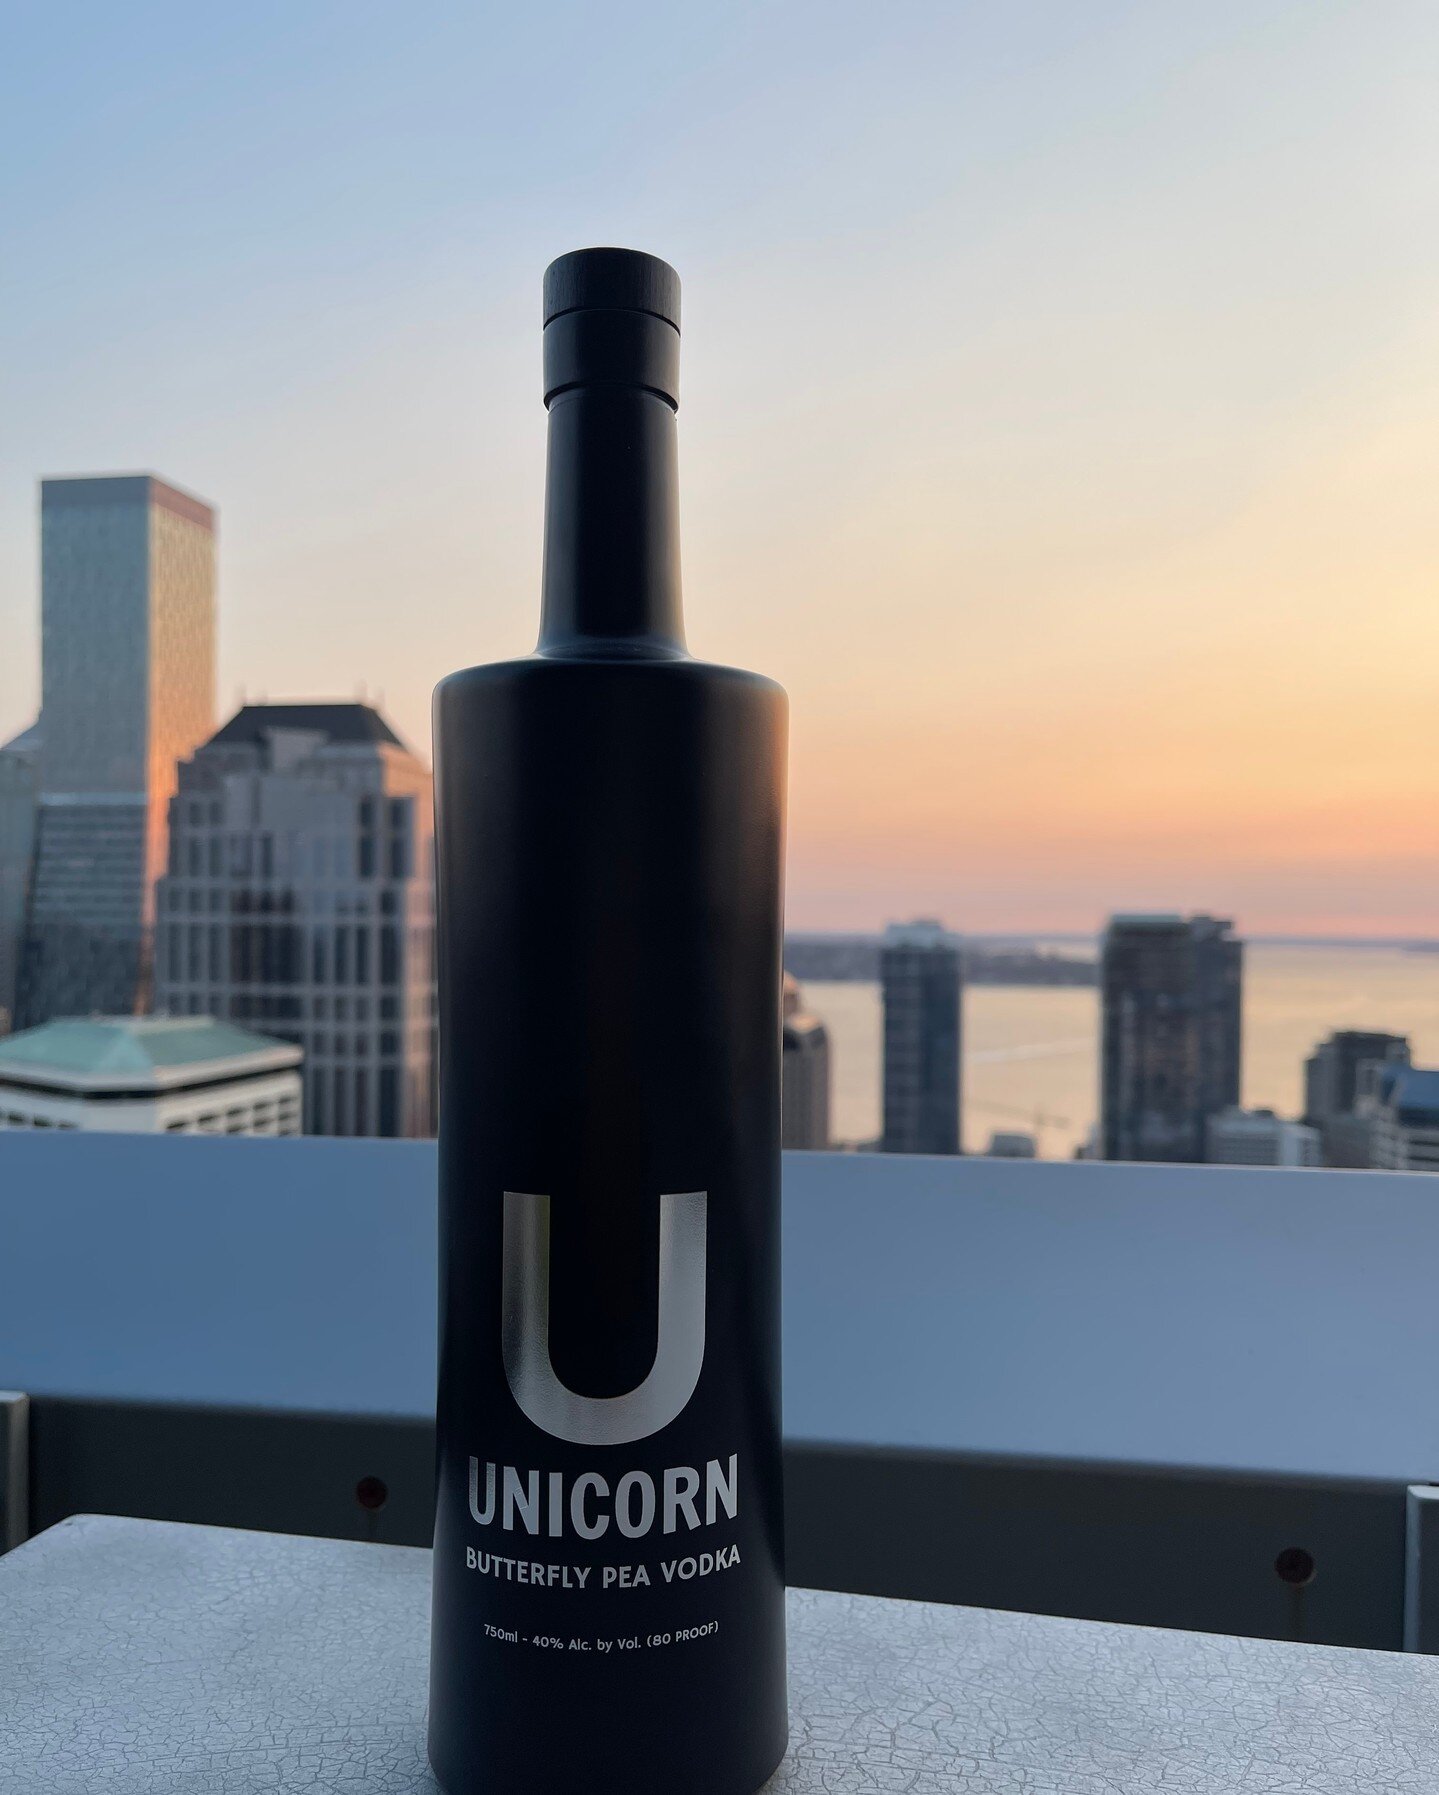 Cheers to sunsets on rooftops and cheers to Fridays⁠
⁠
Shop now at UnicornDistillery.com #linkinbio⁠
⁠
#sunset #friday #fridaymood #vodka #seattle #city #skyline